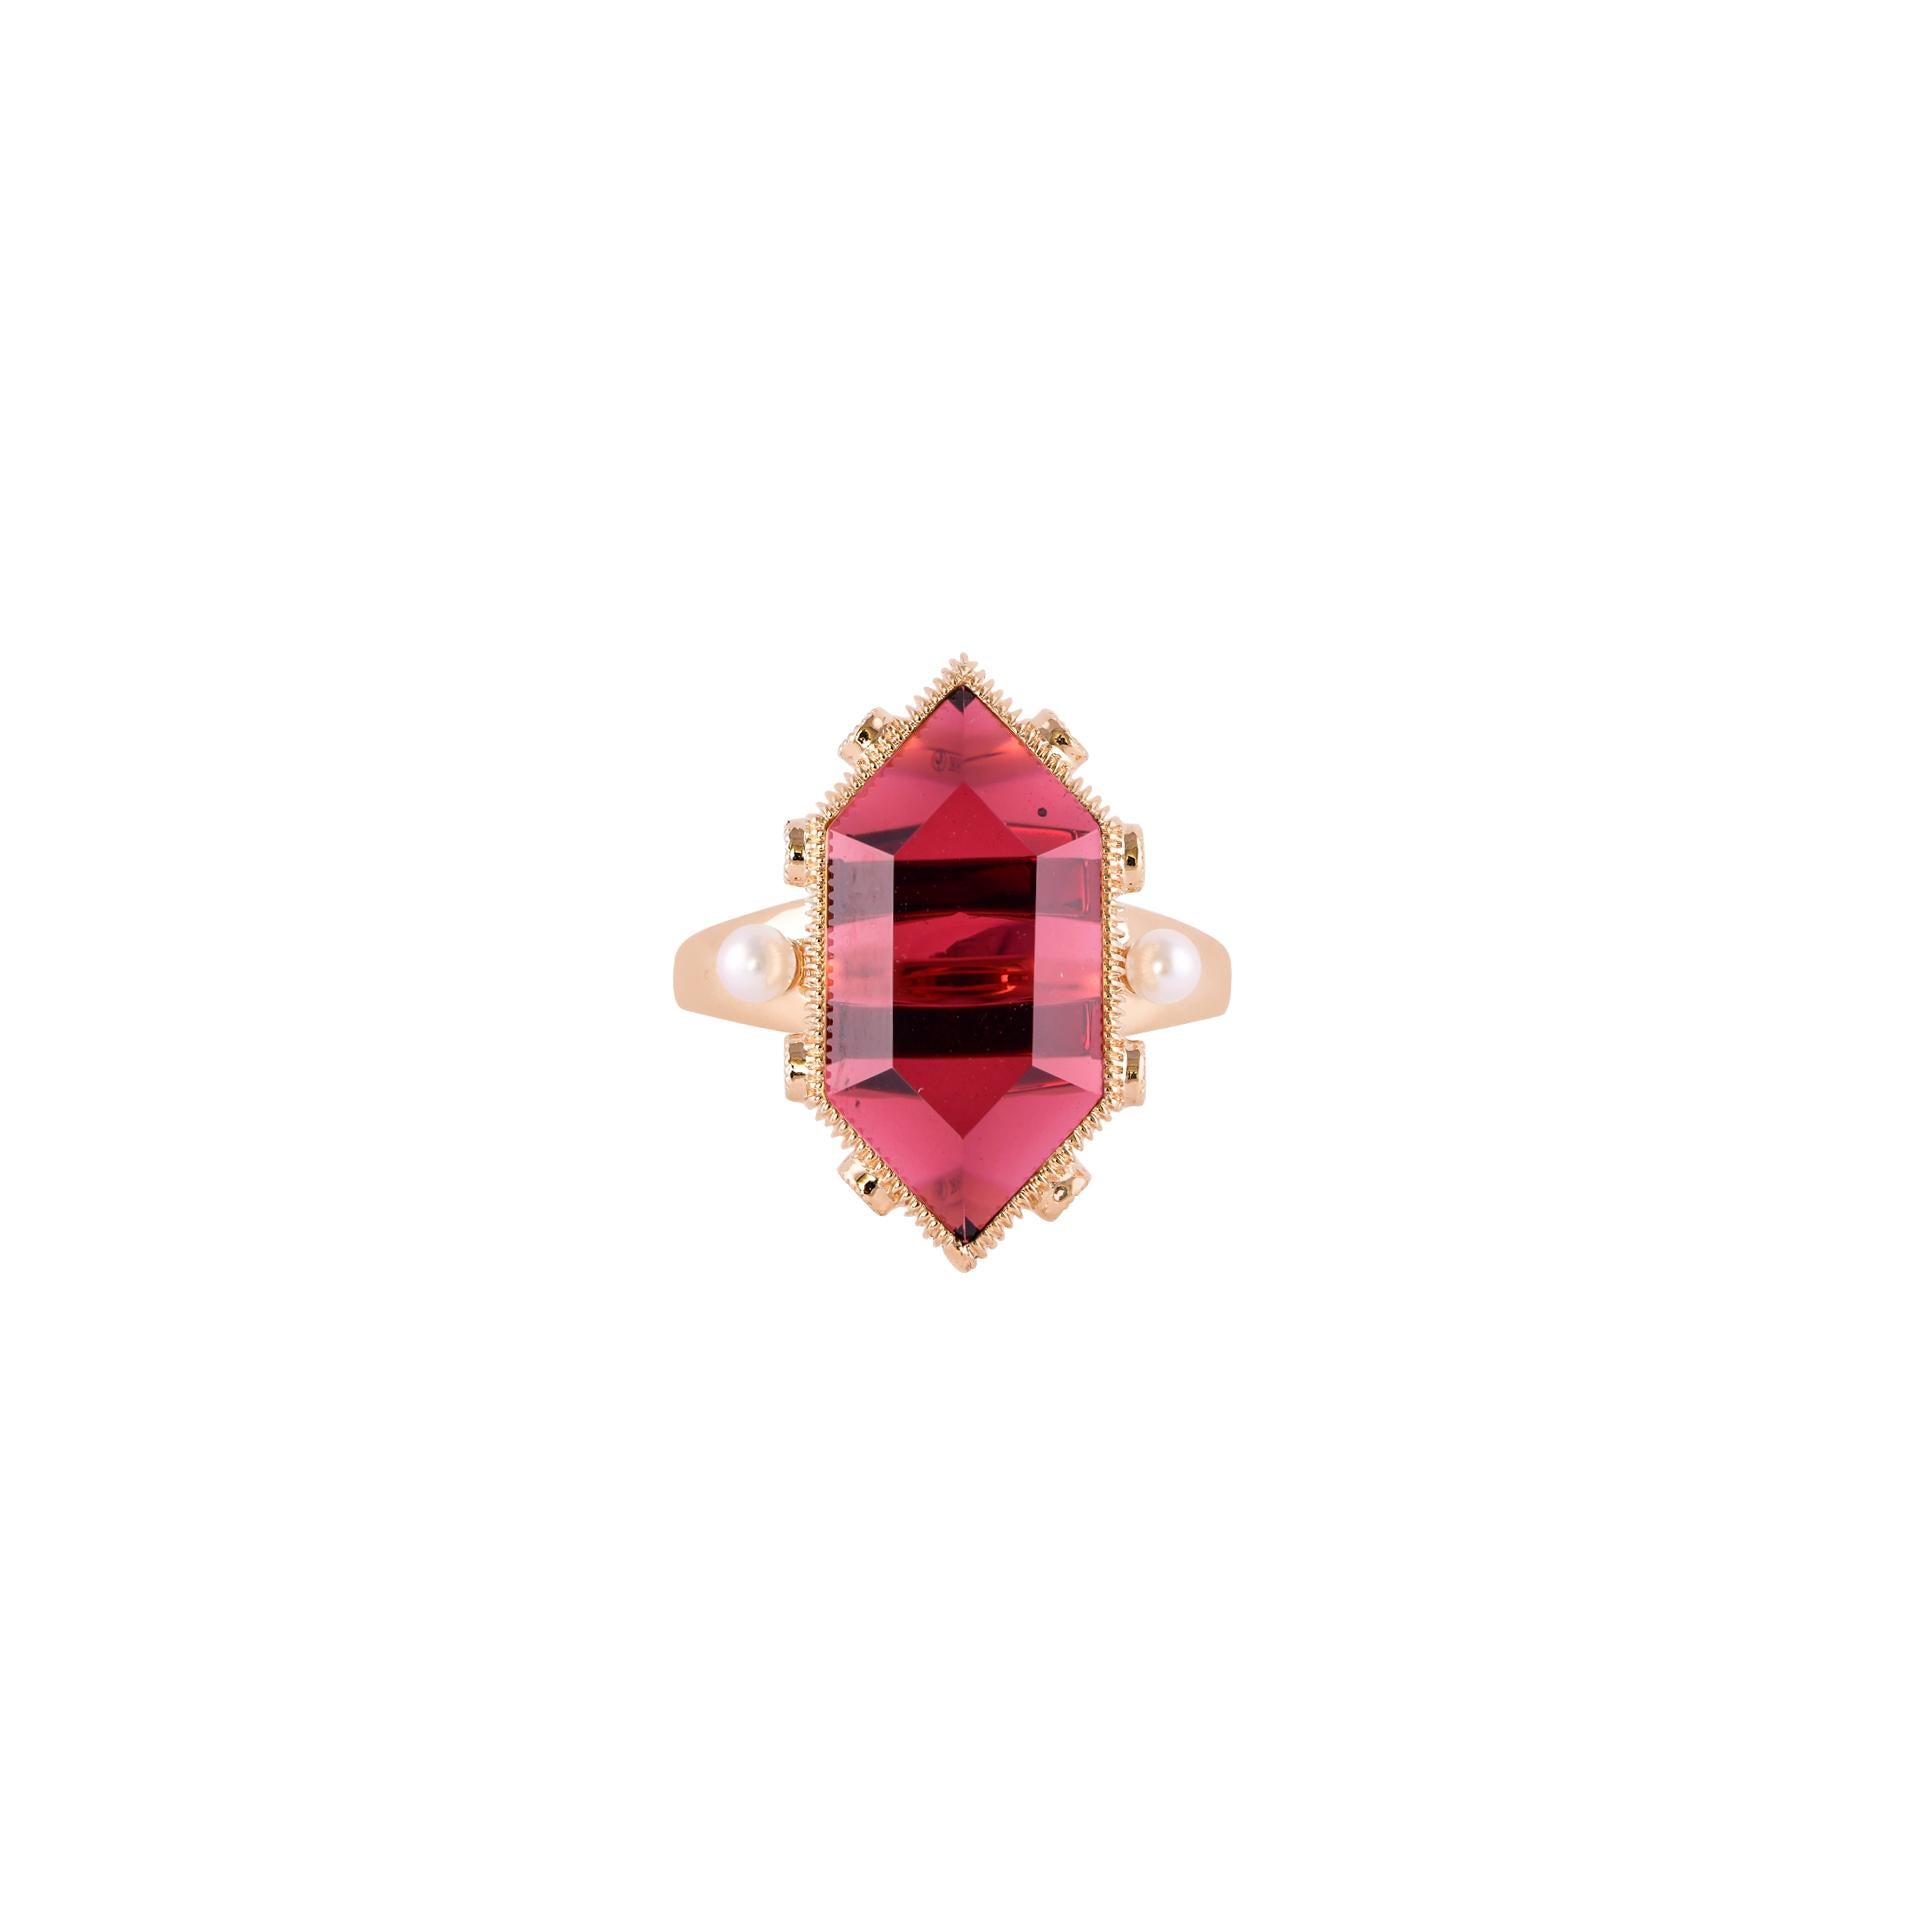 Sunita Nahata presents a series of 'Healing Hexagon' Rings made to wear everyday and bring harmony to the mind, body and soul. 

This is a regal red garnet ring and this gemstone is particularly known to bring powerful energies to Aquarians but in